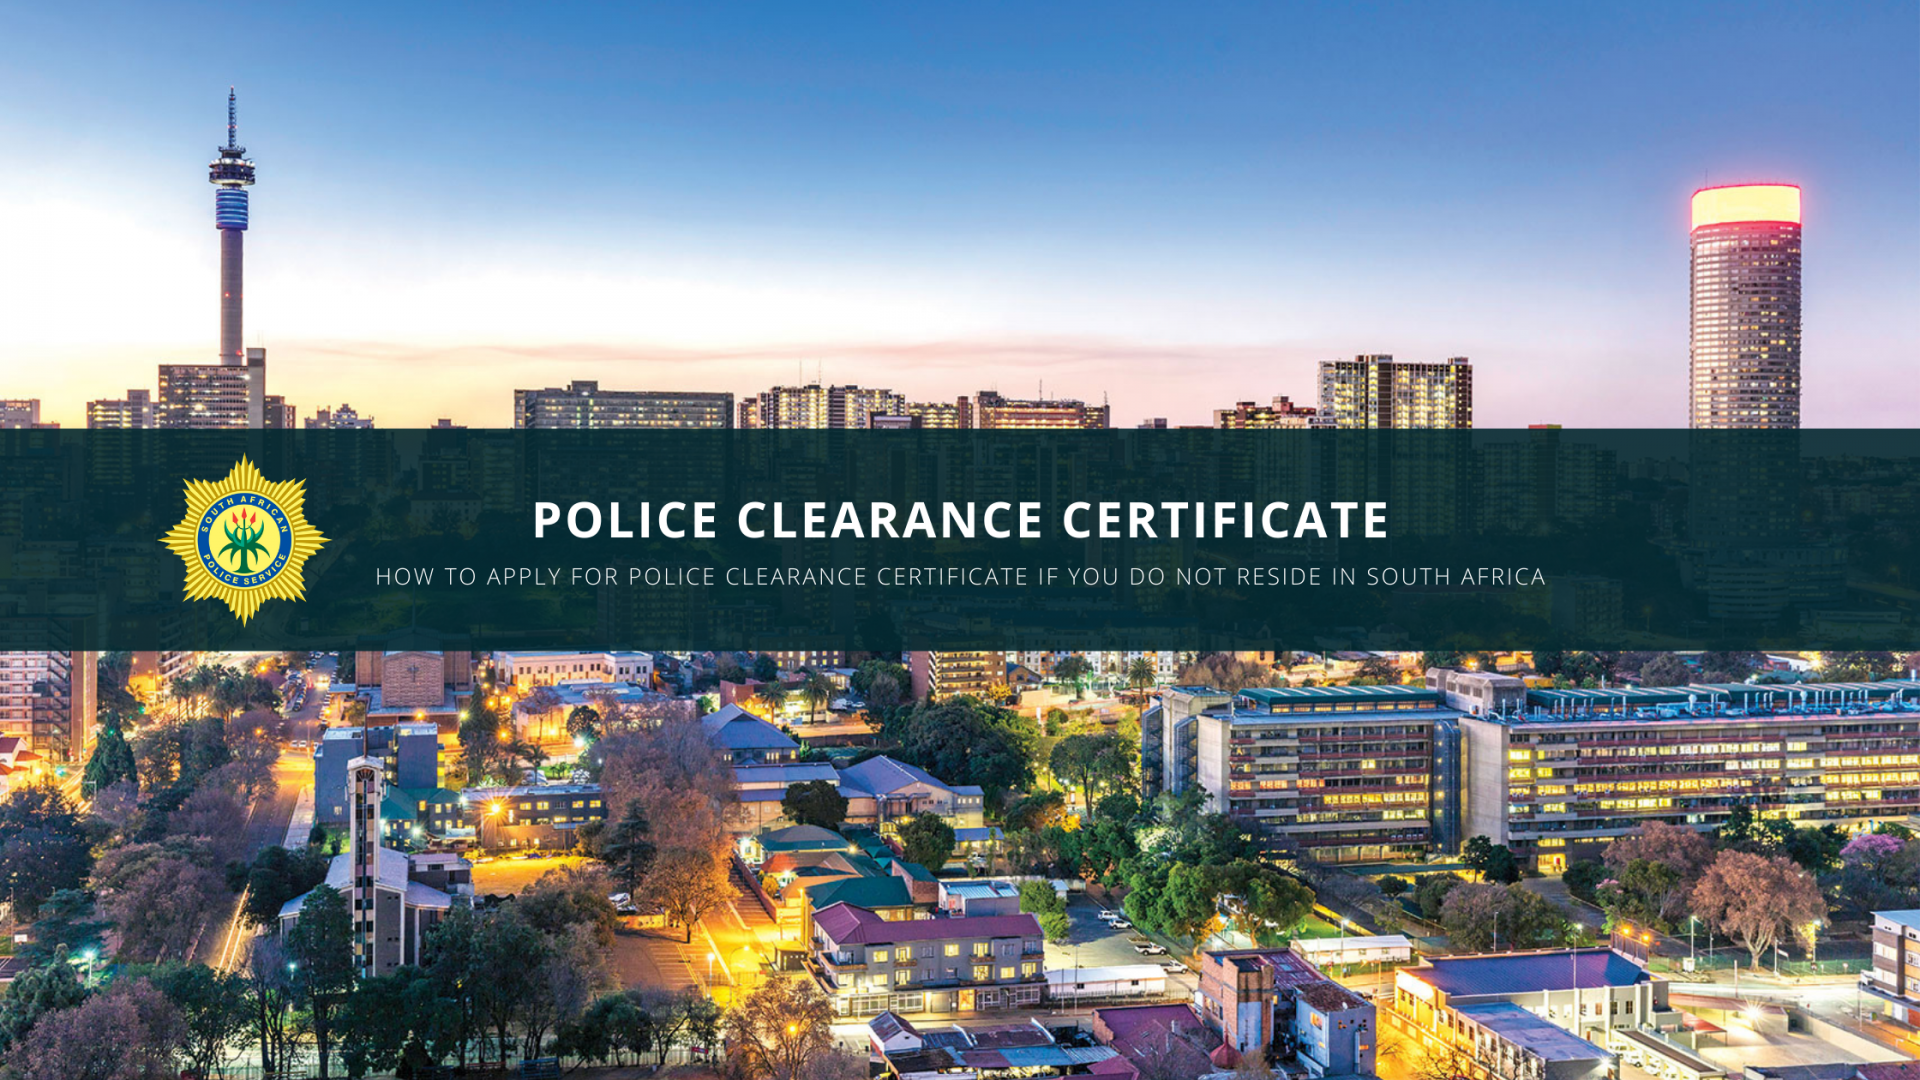 How To Apply For Police Clearance If You Do Not Reside In South Africa